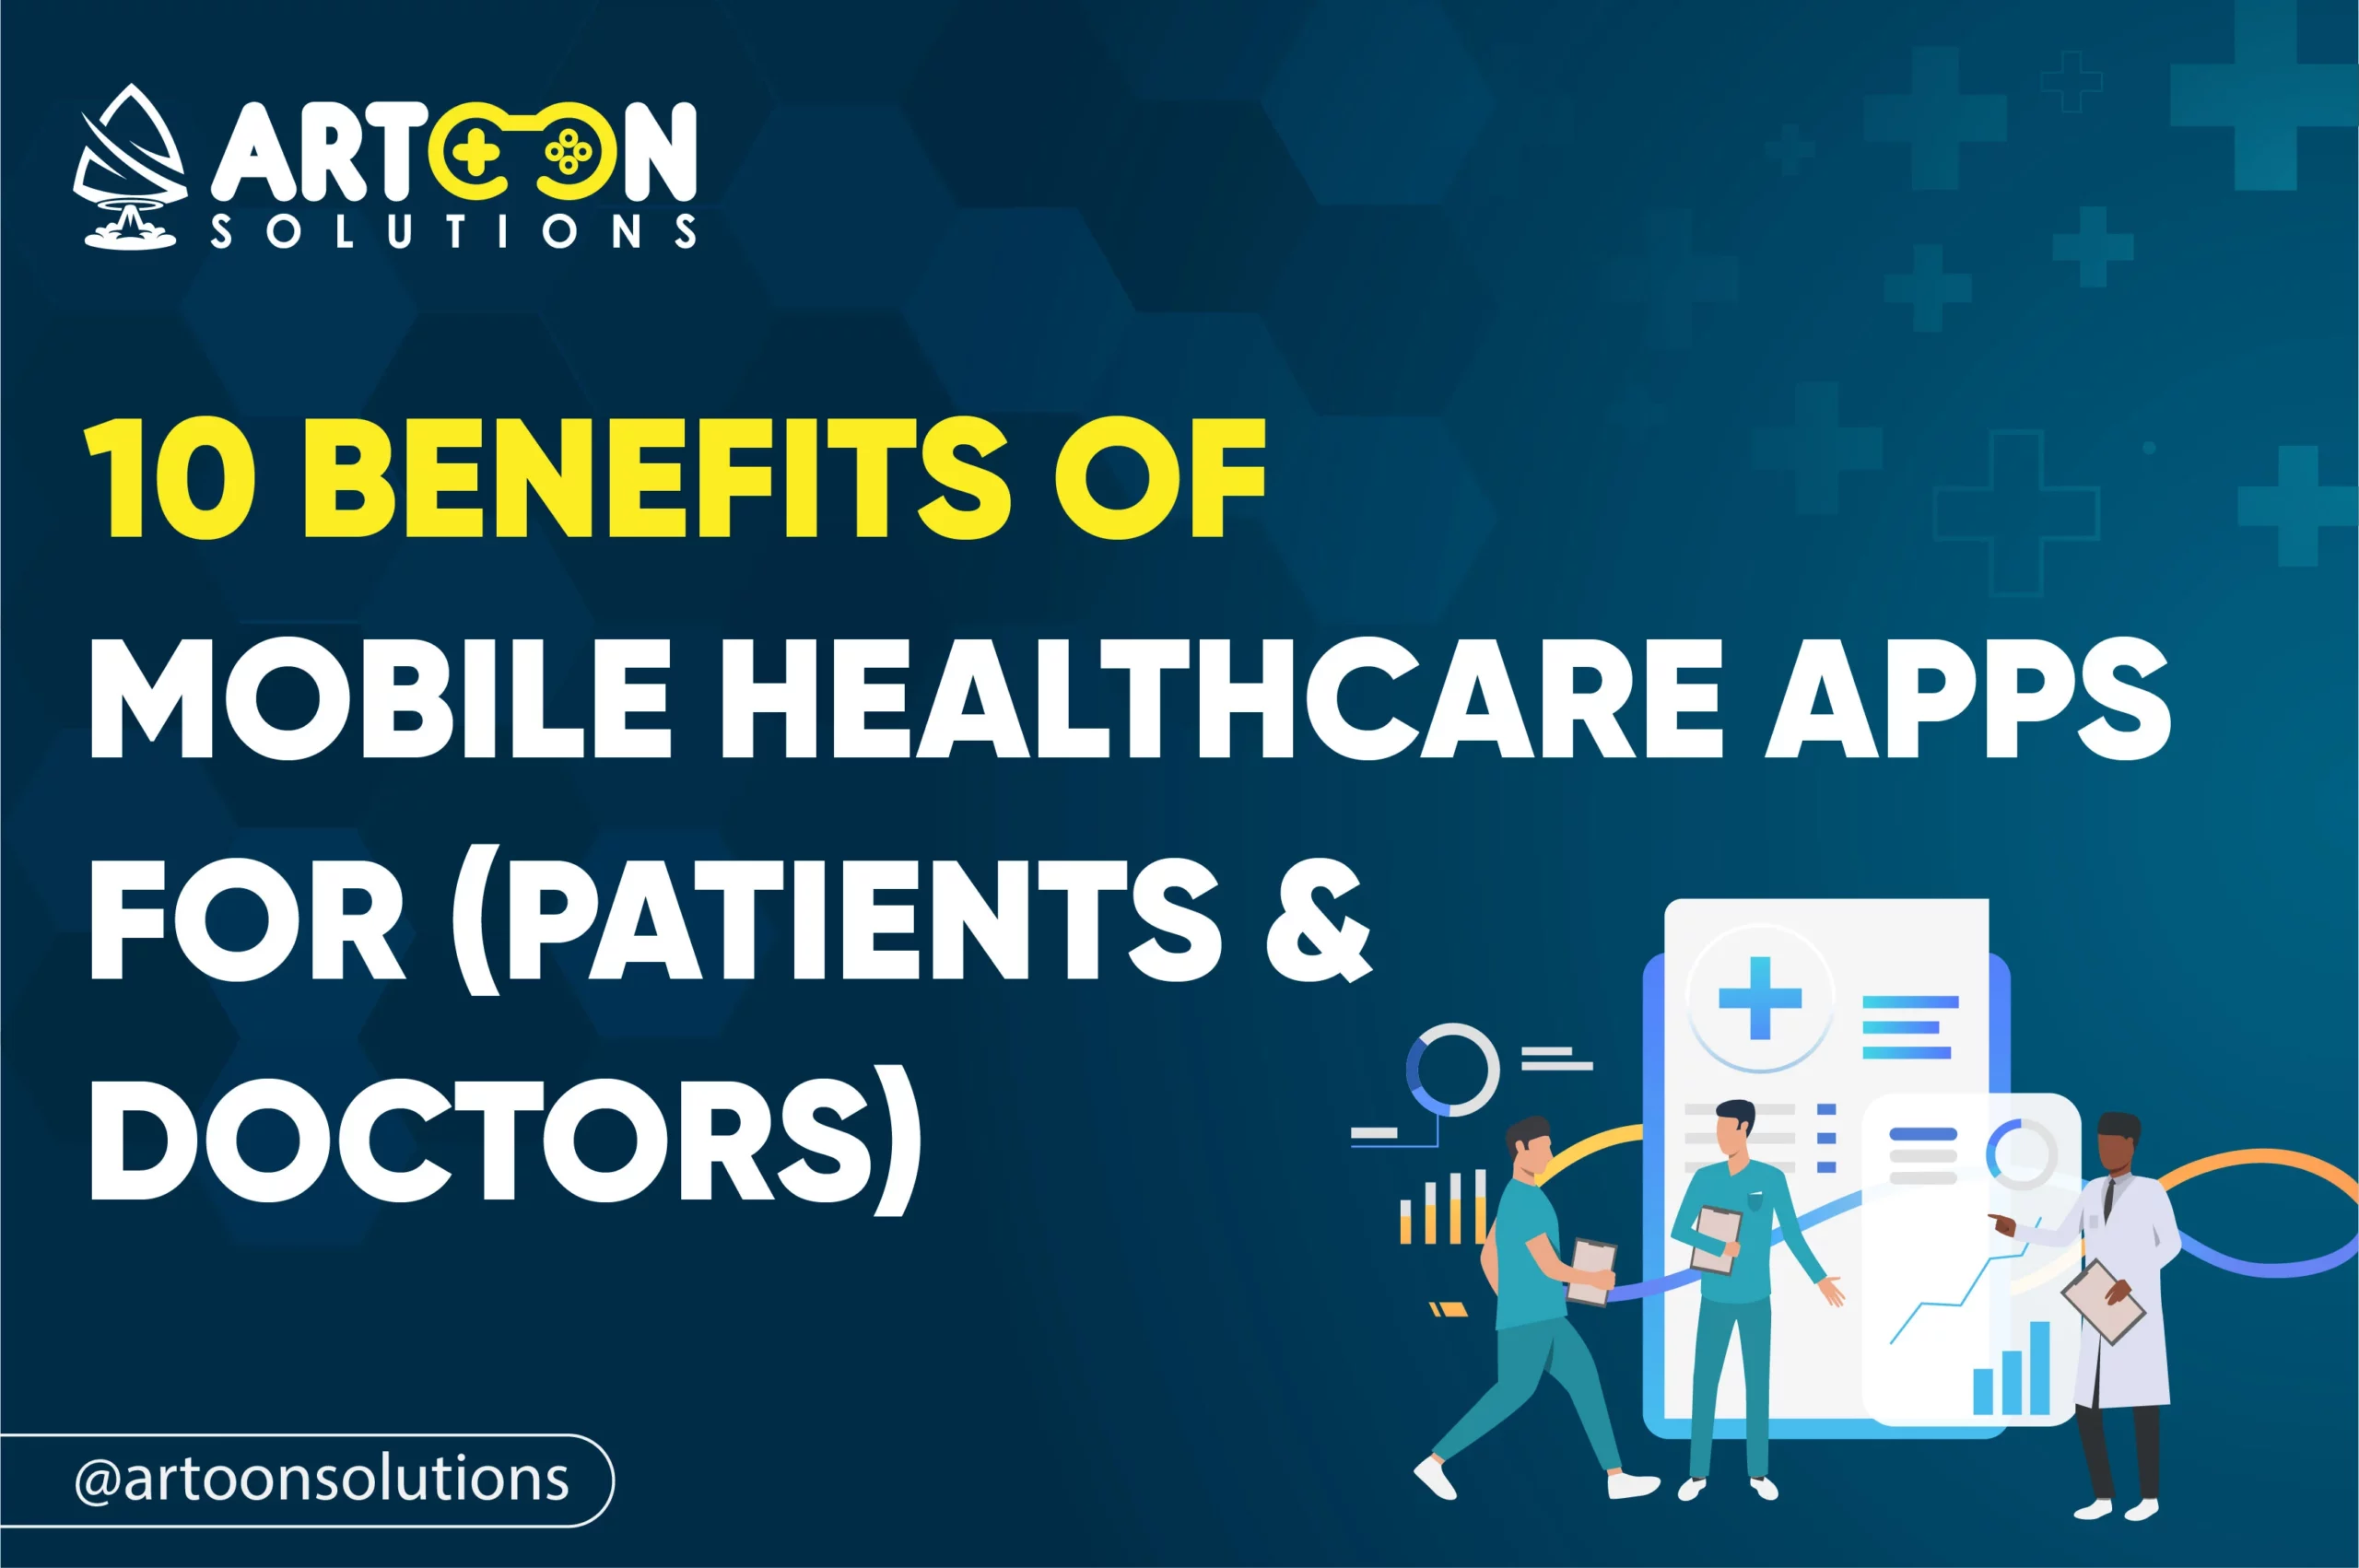 10 Benefits of Mobile Healthcare Apps {for Patients & Doctors}